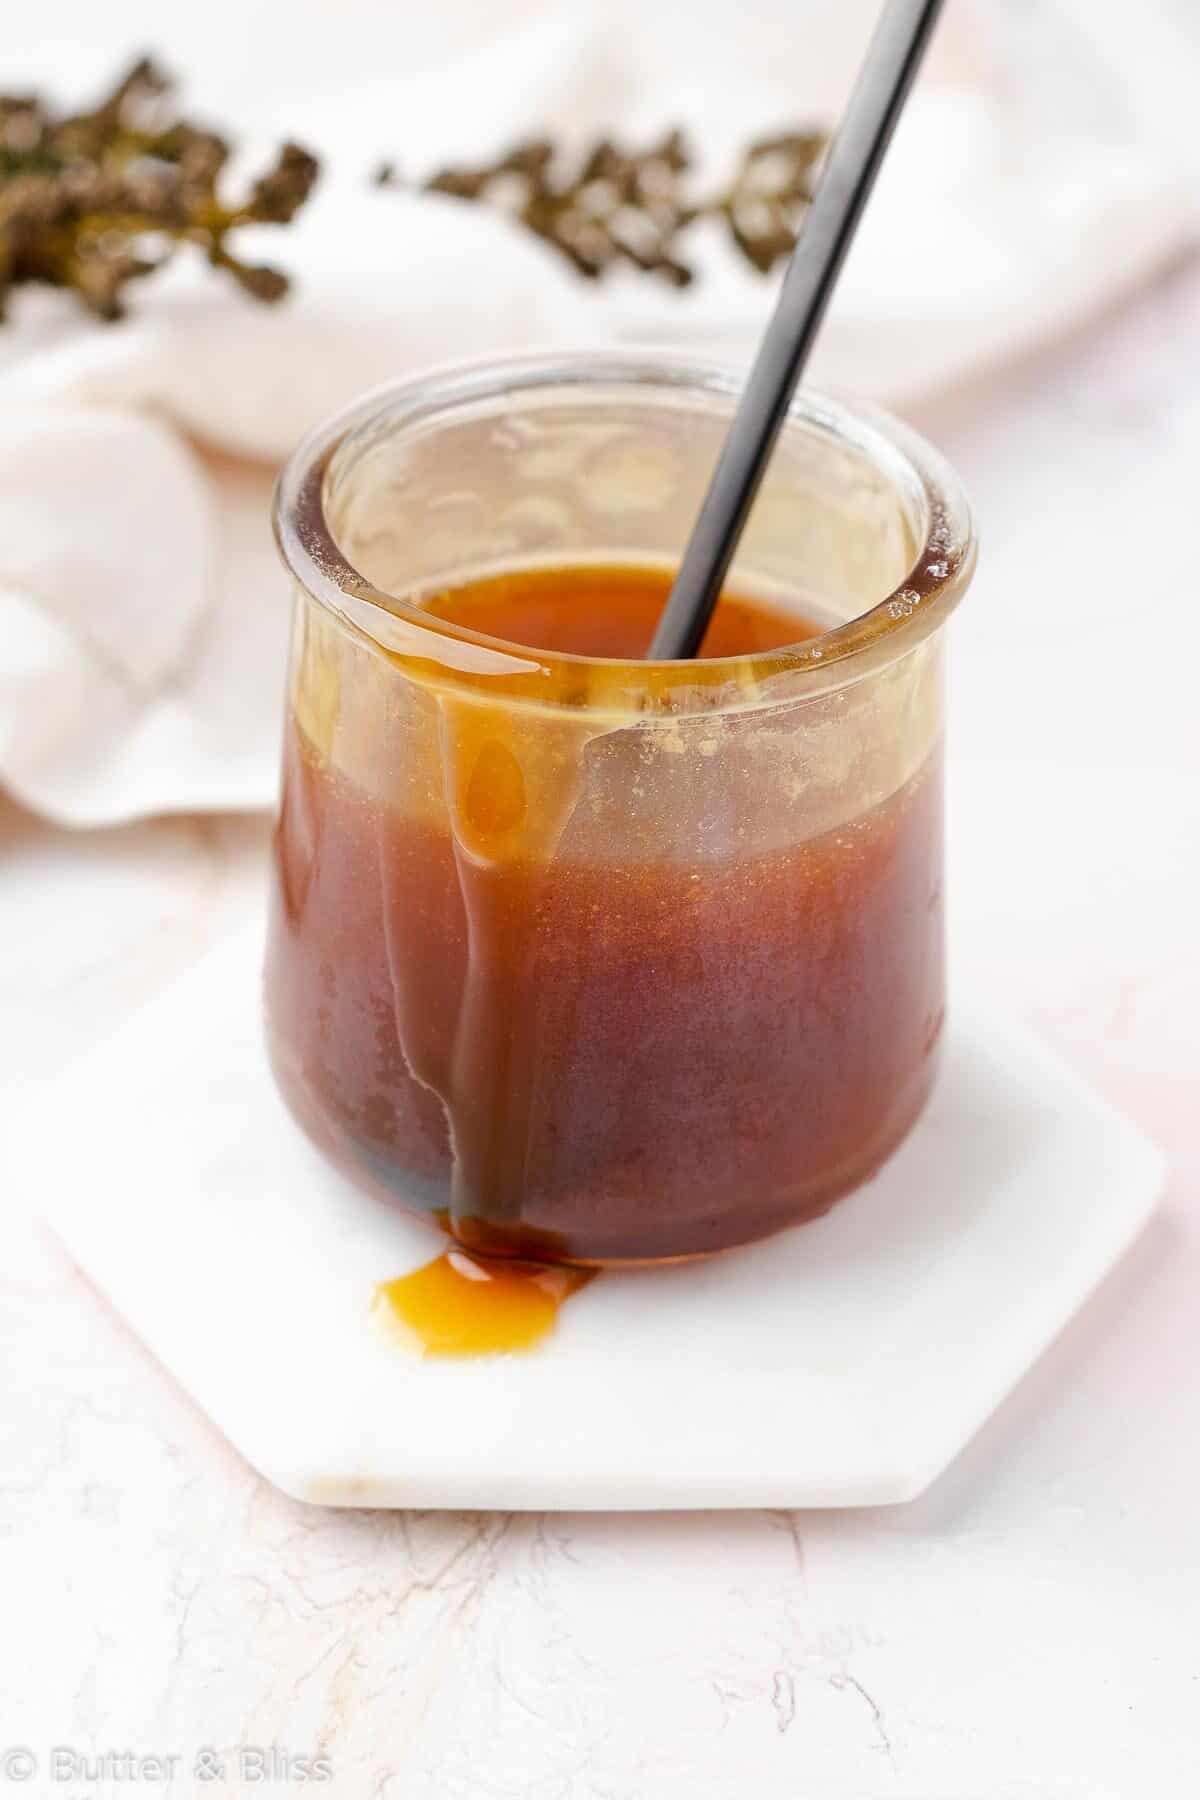 Maple syrup caramel sauce dripping down a small jar